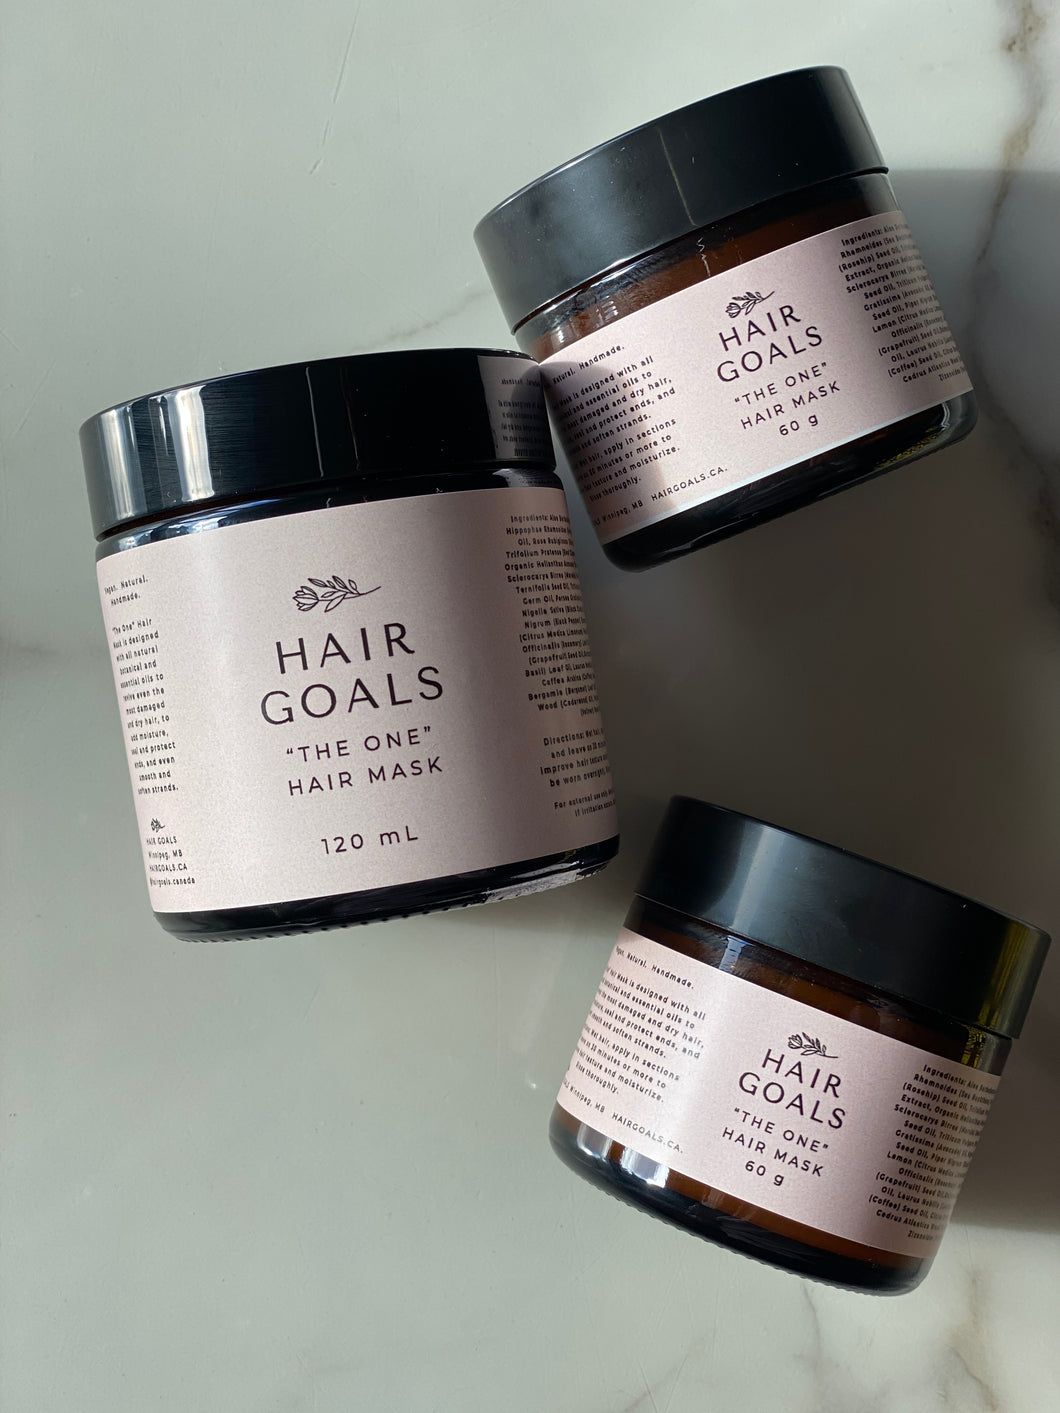 “The One” Hair Mask